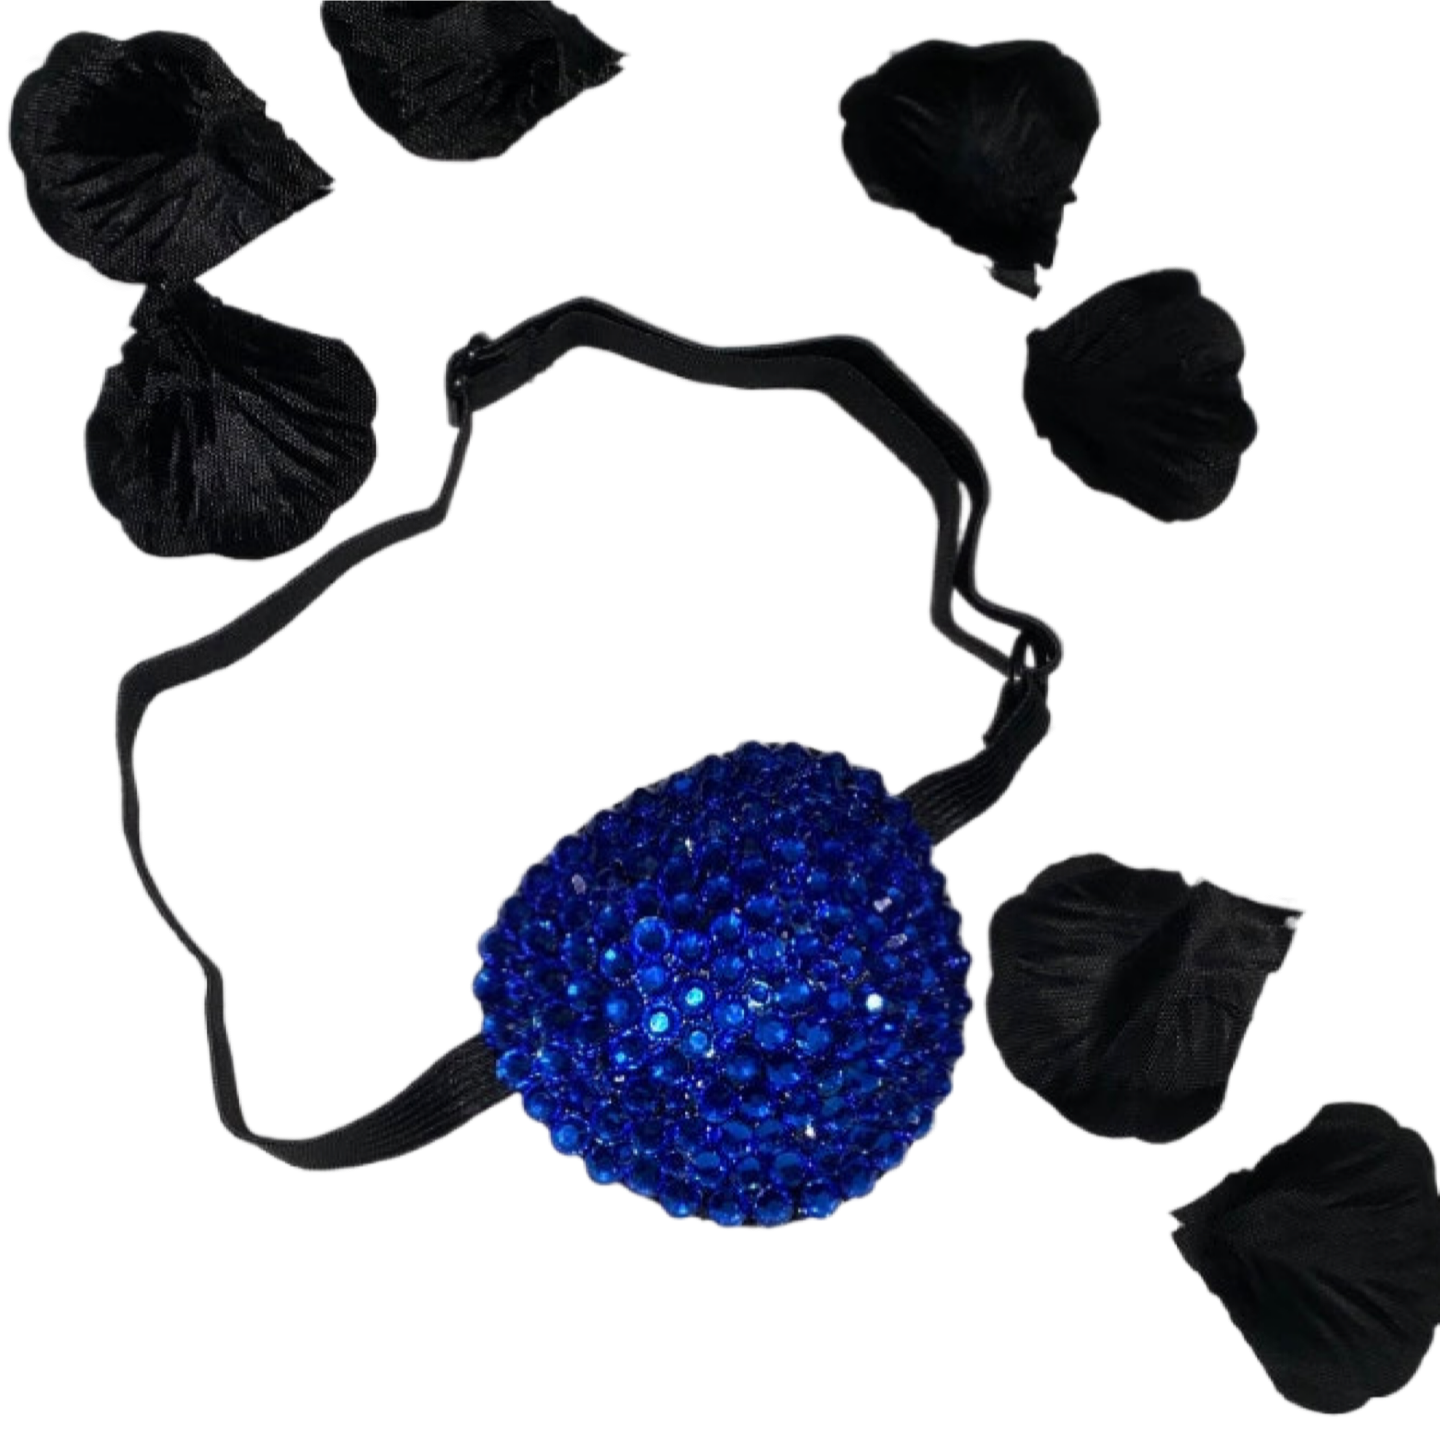 Black Padded Medical Patch In Sapphire Blue Bedazzled Eye Patch